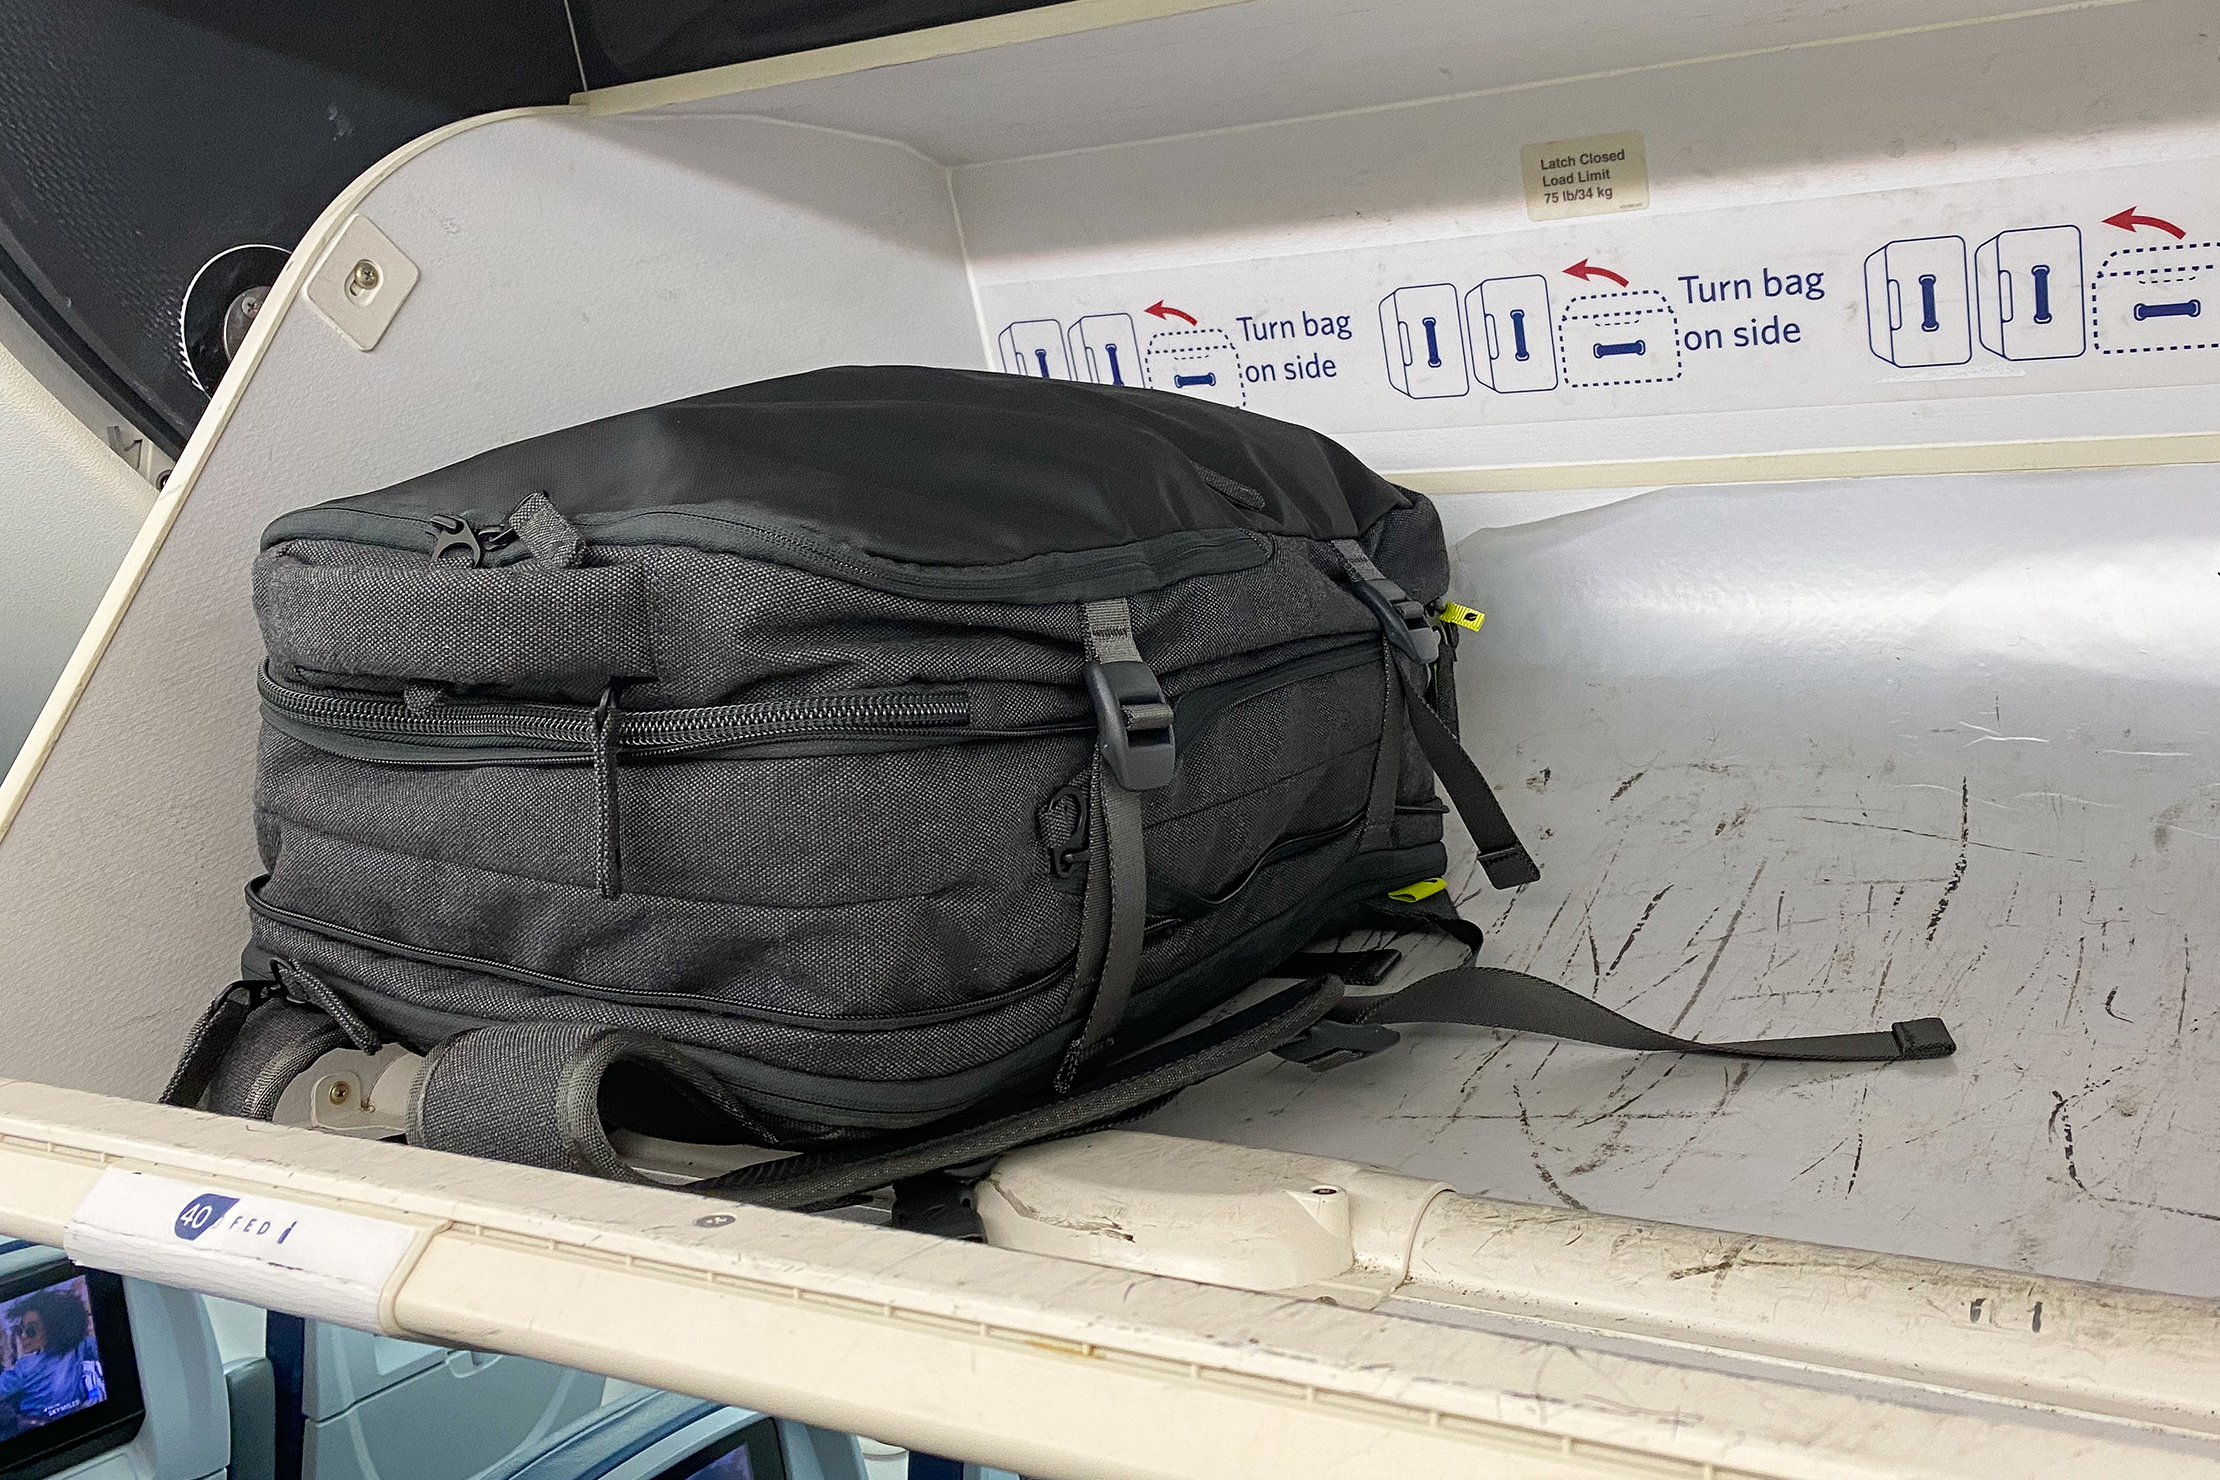 Incase EO Travel Backpack In The Overhead Bin On An Airplane